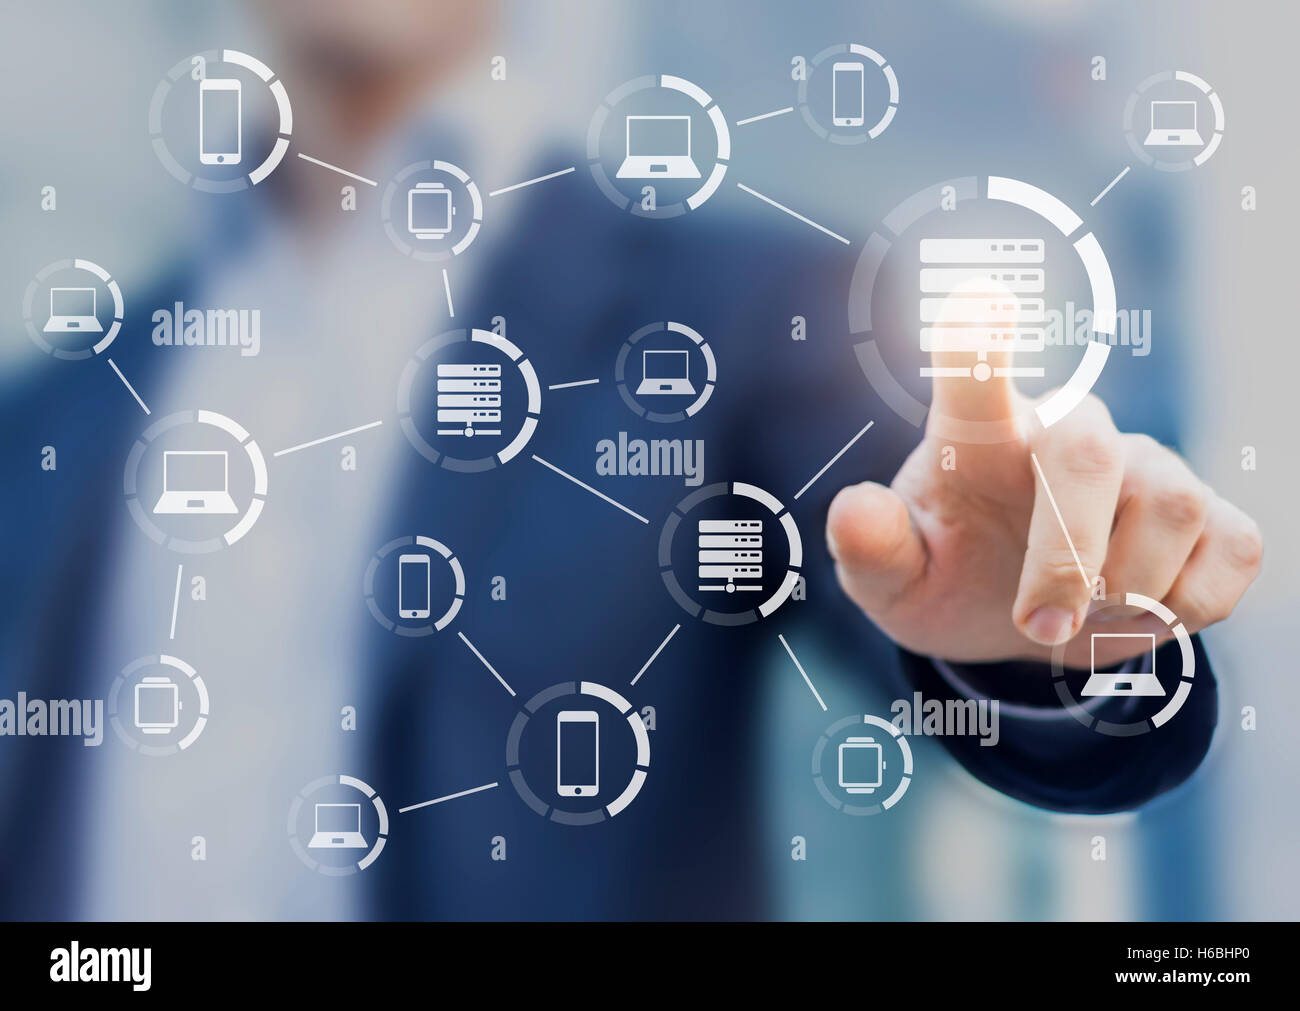 Technology of internet with network structure connecting servers, computers and mobile devices. Expert in background Stock Photo